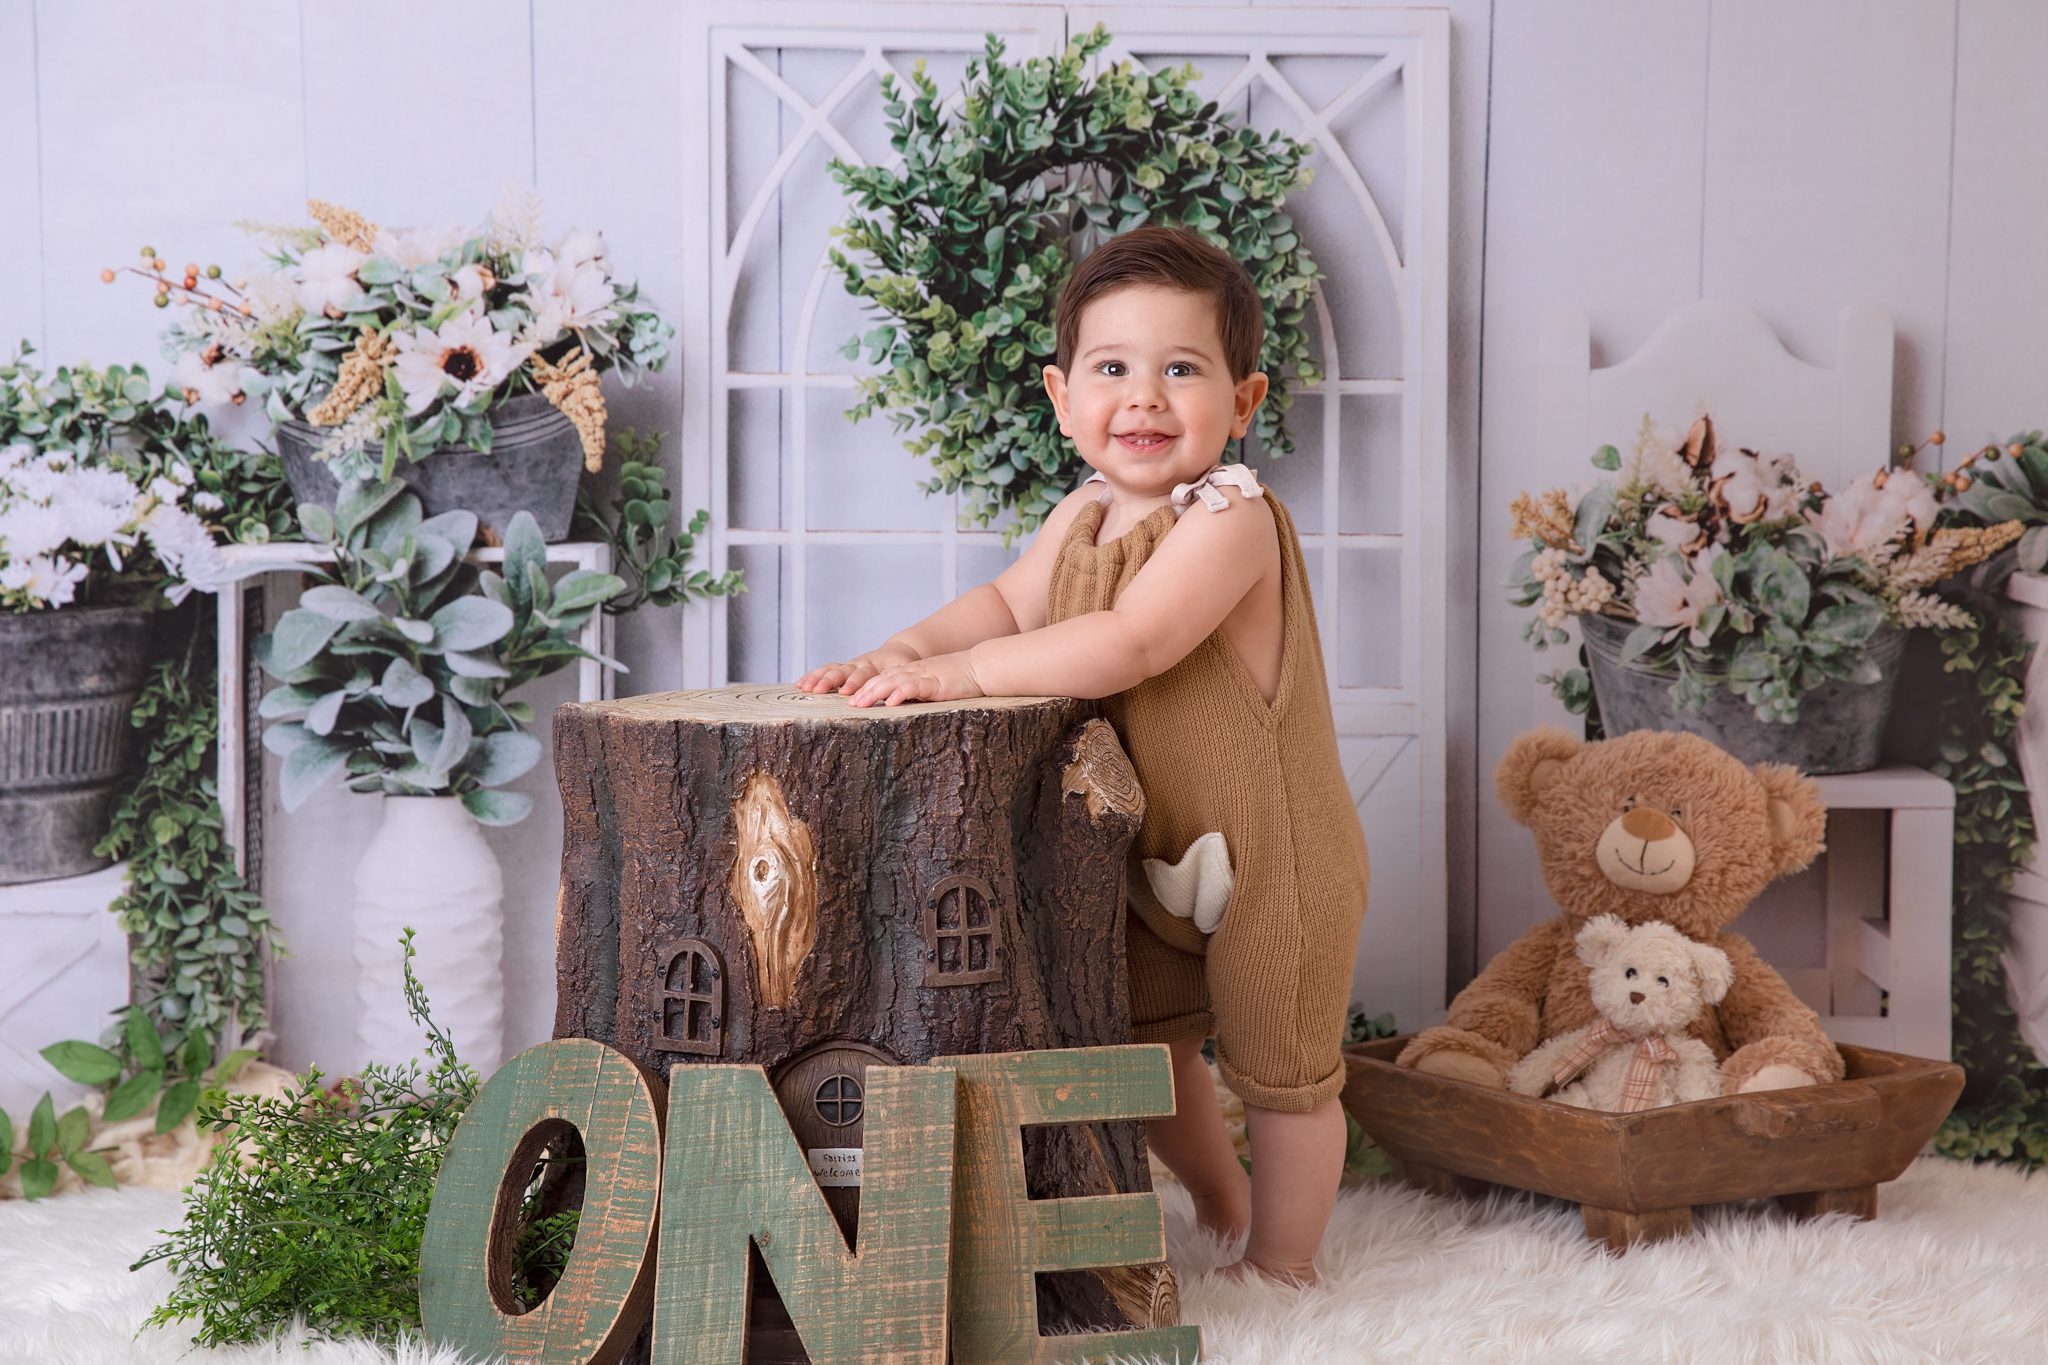 baby boy standing next to a log with one sign